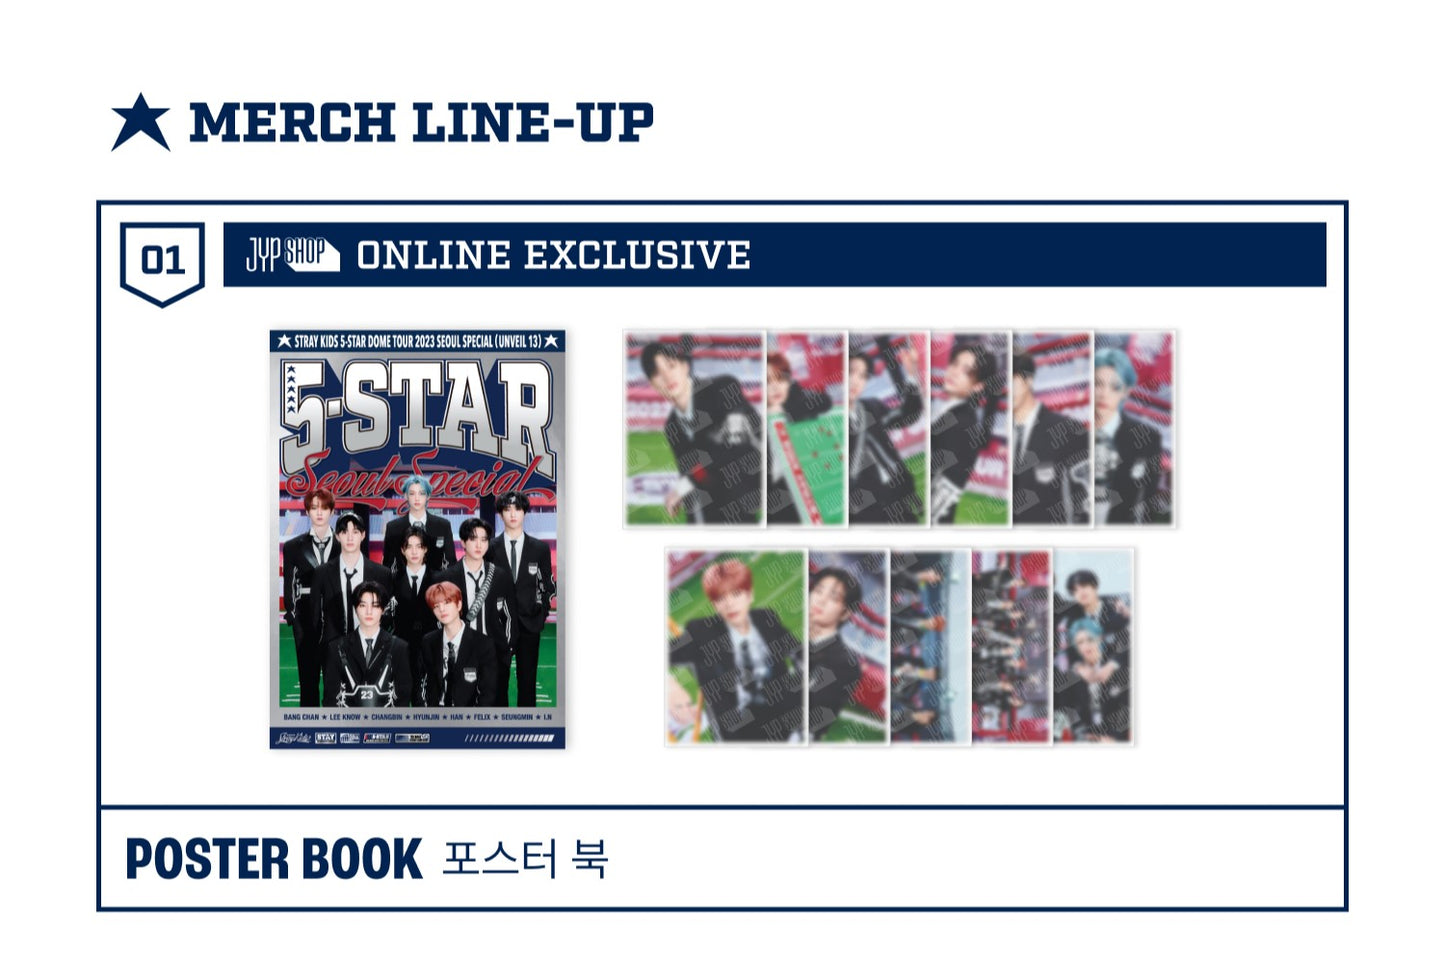 jstore_online_stray_kids_5_star_seoul_special_merch_Poster_book